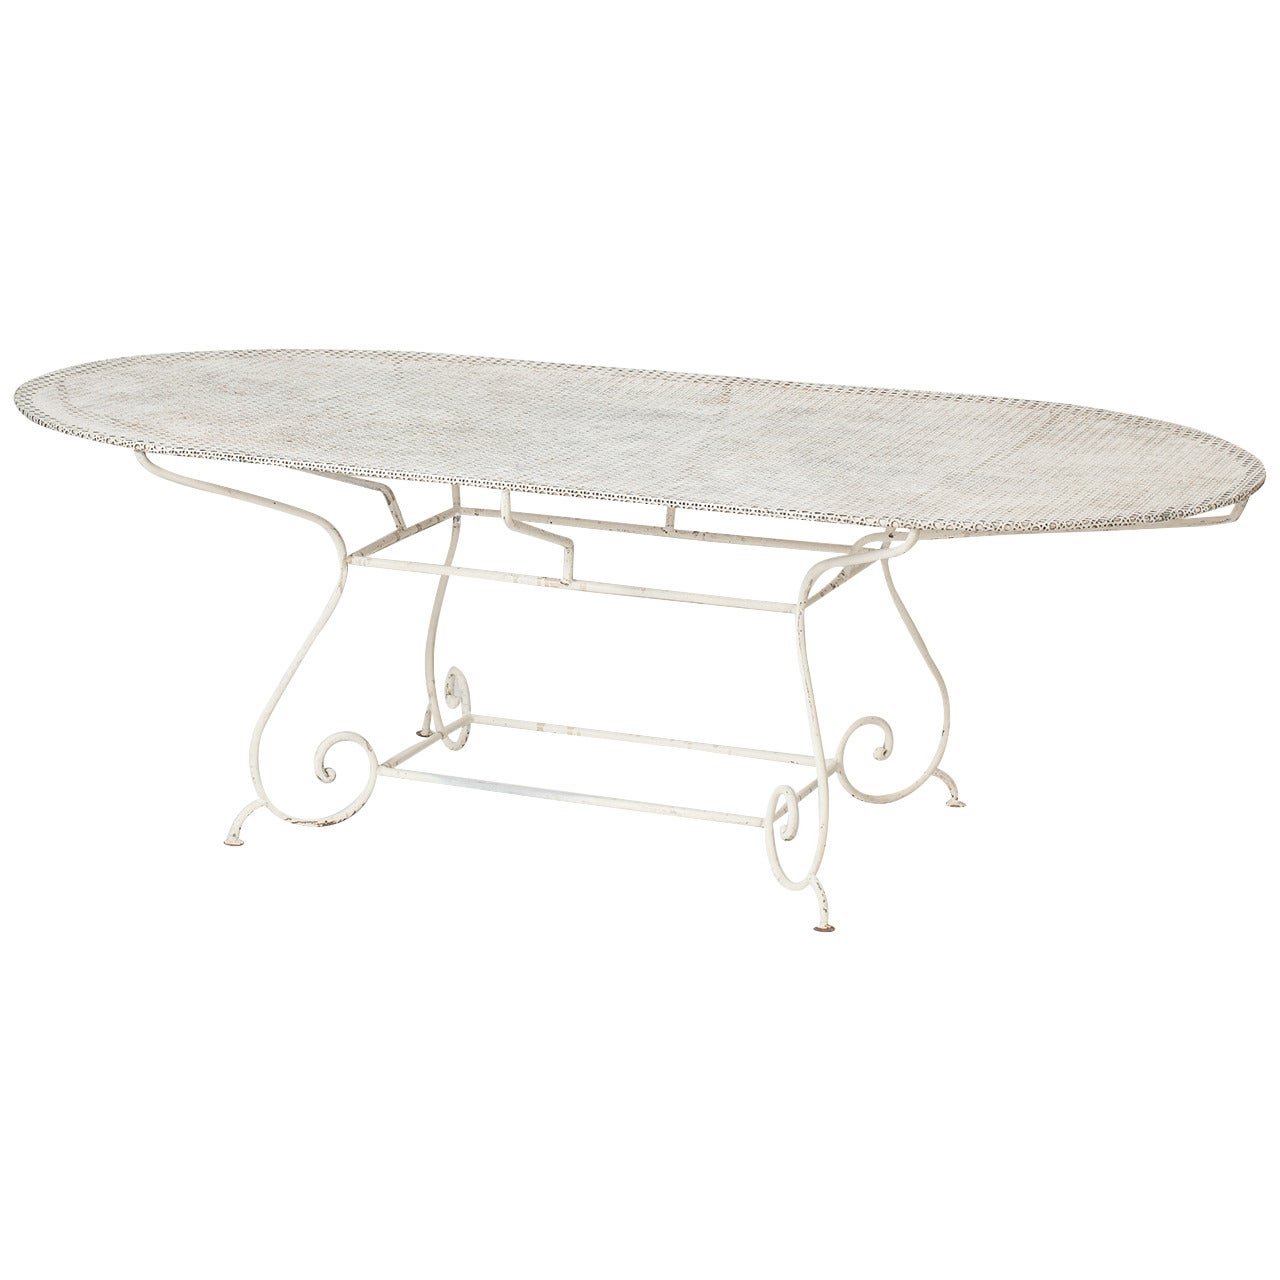 French White Painted Iron Garden Table with Scrolled Base, circa 1950